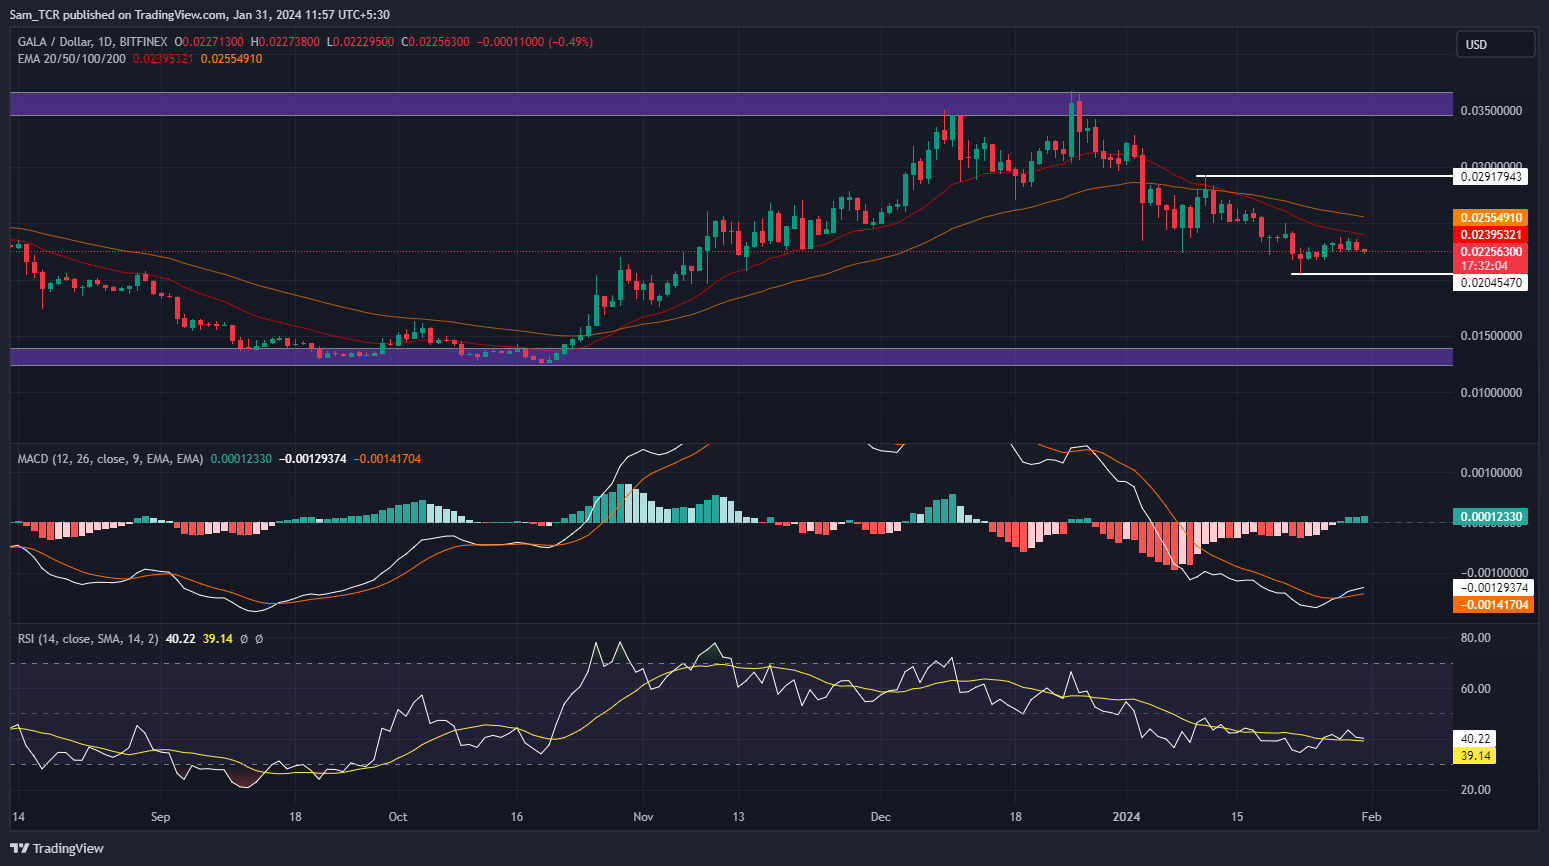 Will GALA Crypto Continue on The Overall Bullish Trend?